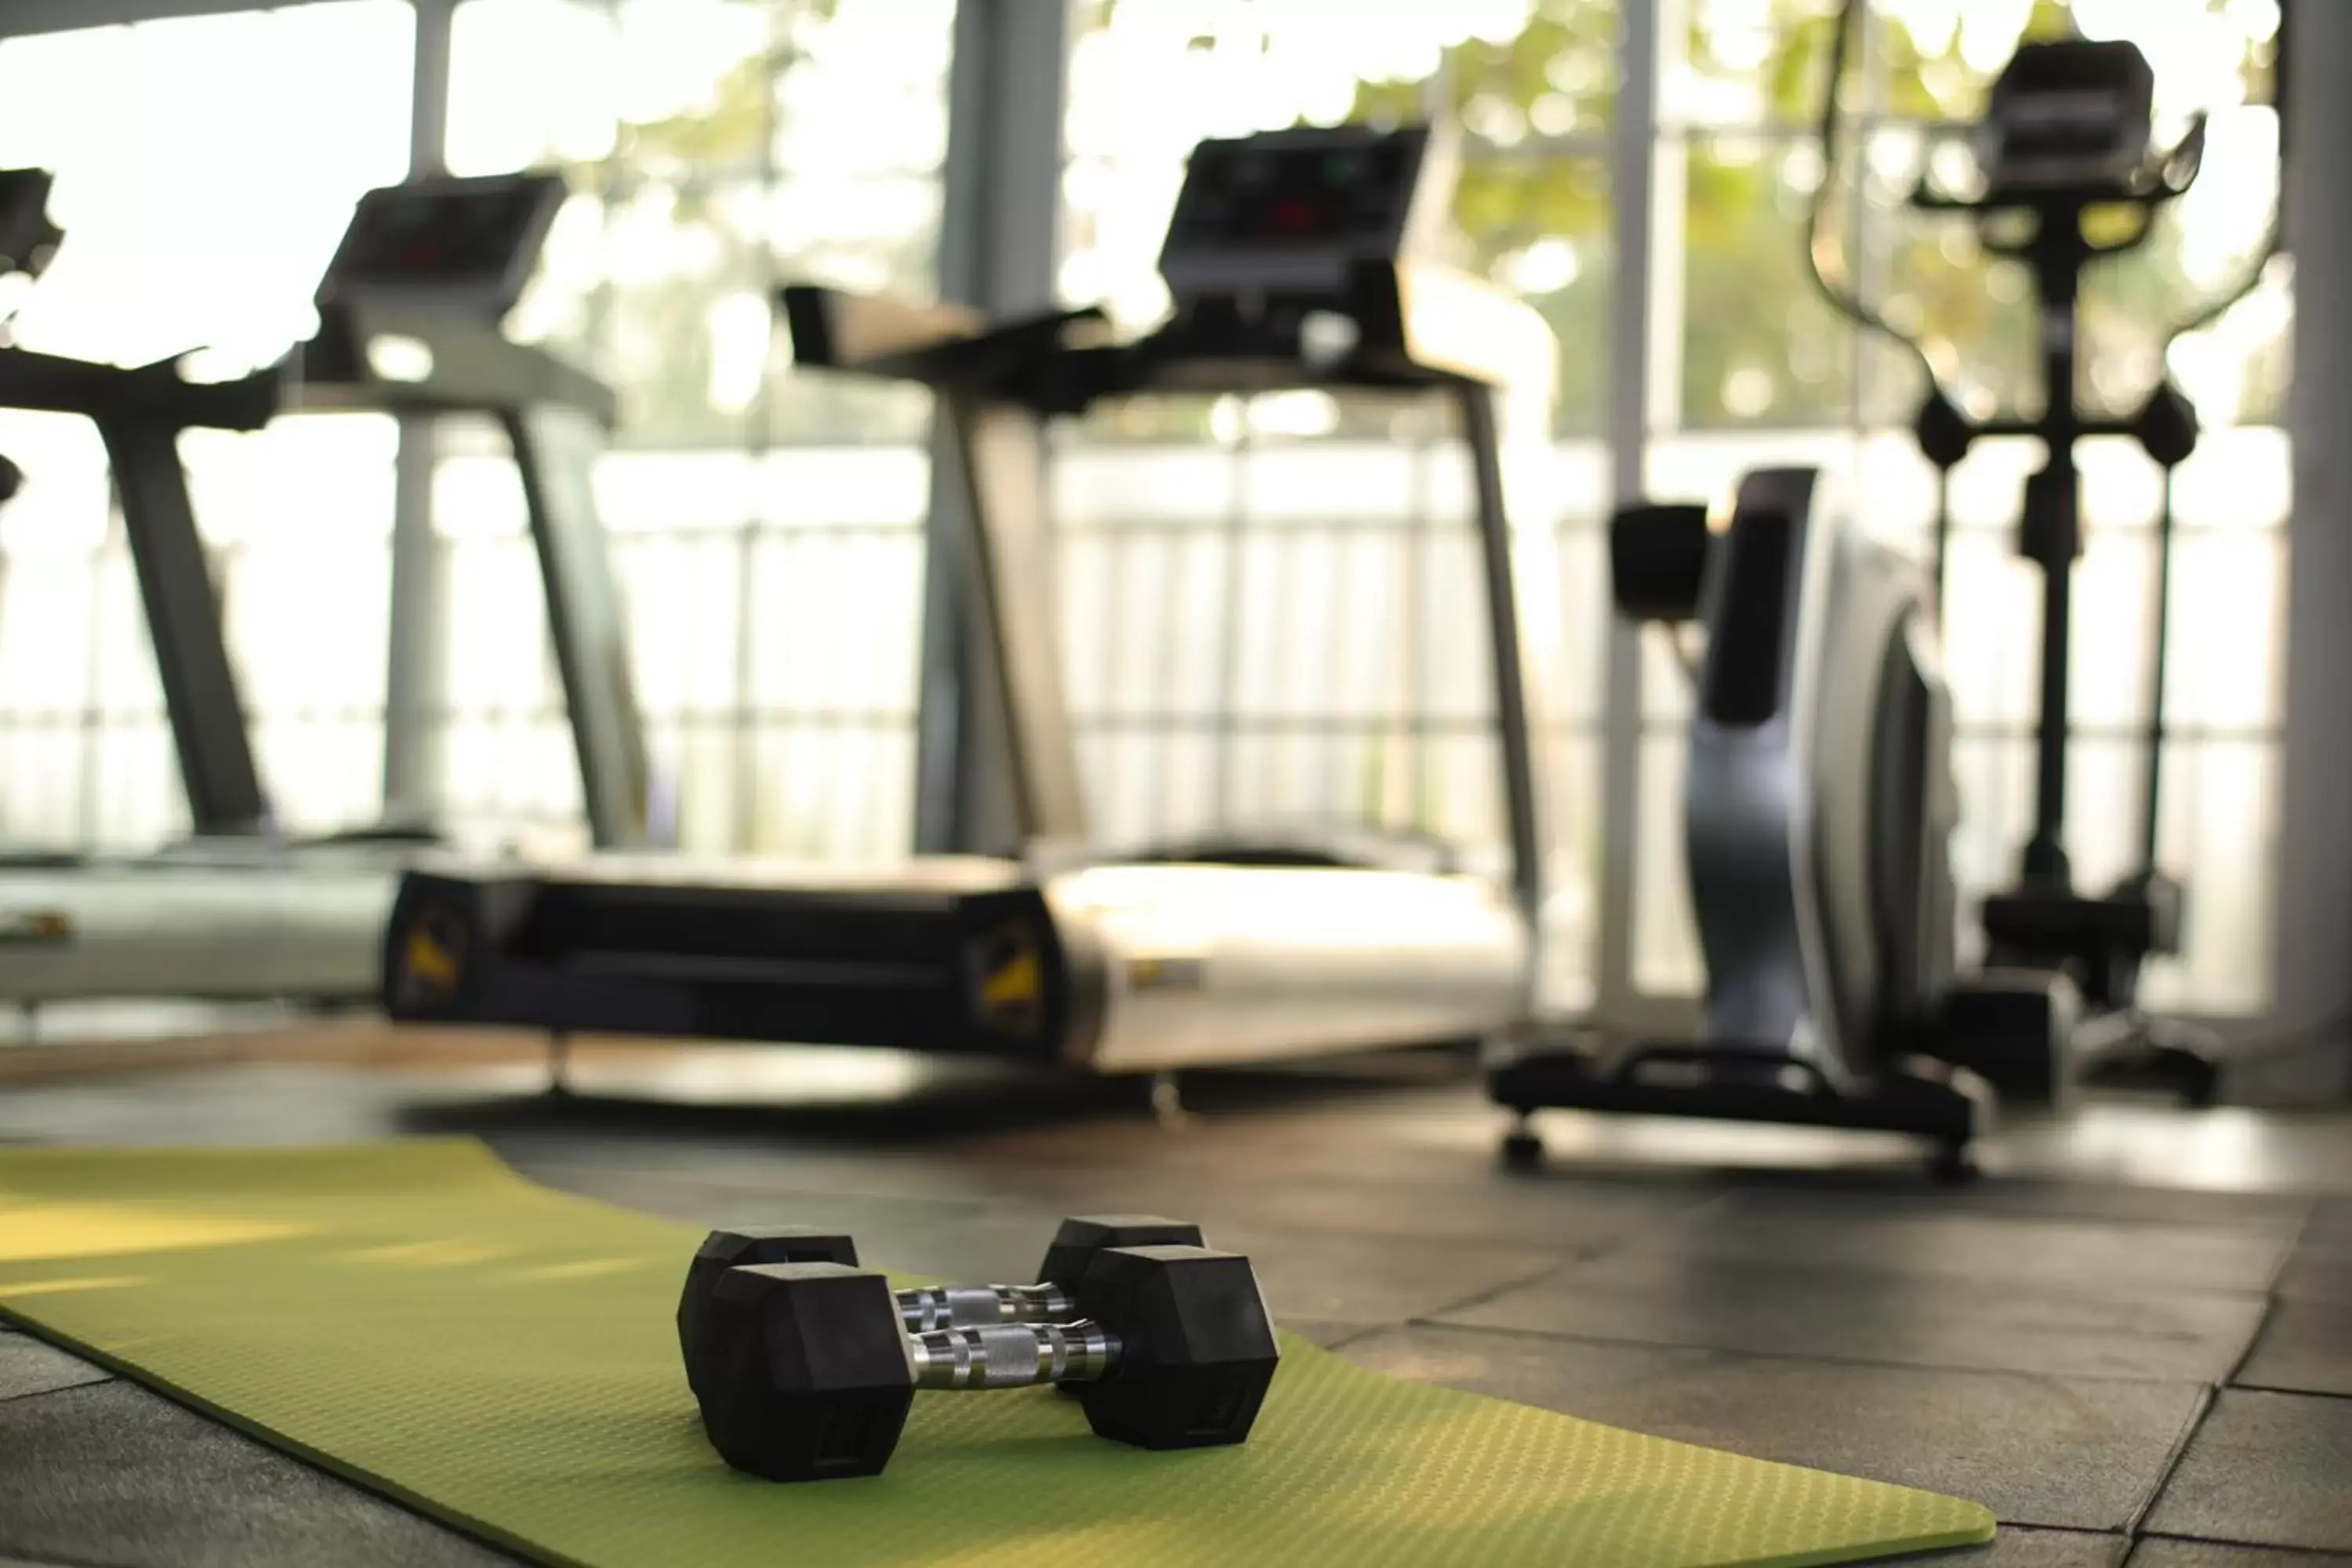 Fitness centre/facilities, Fitness Center/Facilities in White Boutique Hotel and Residences